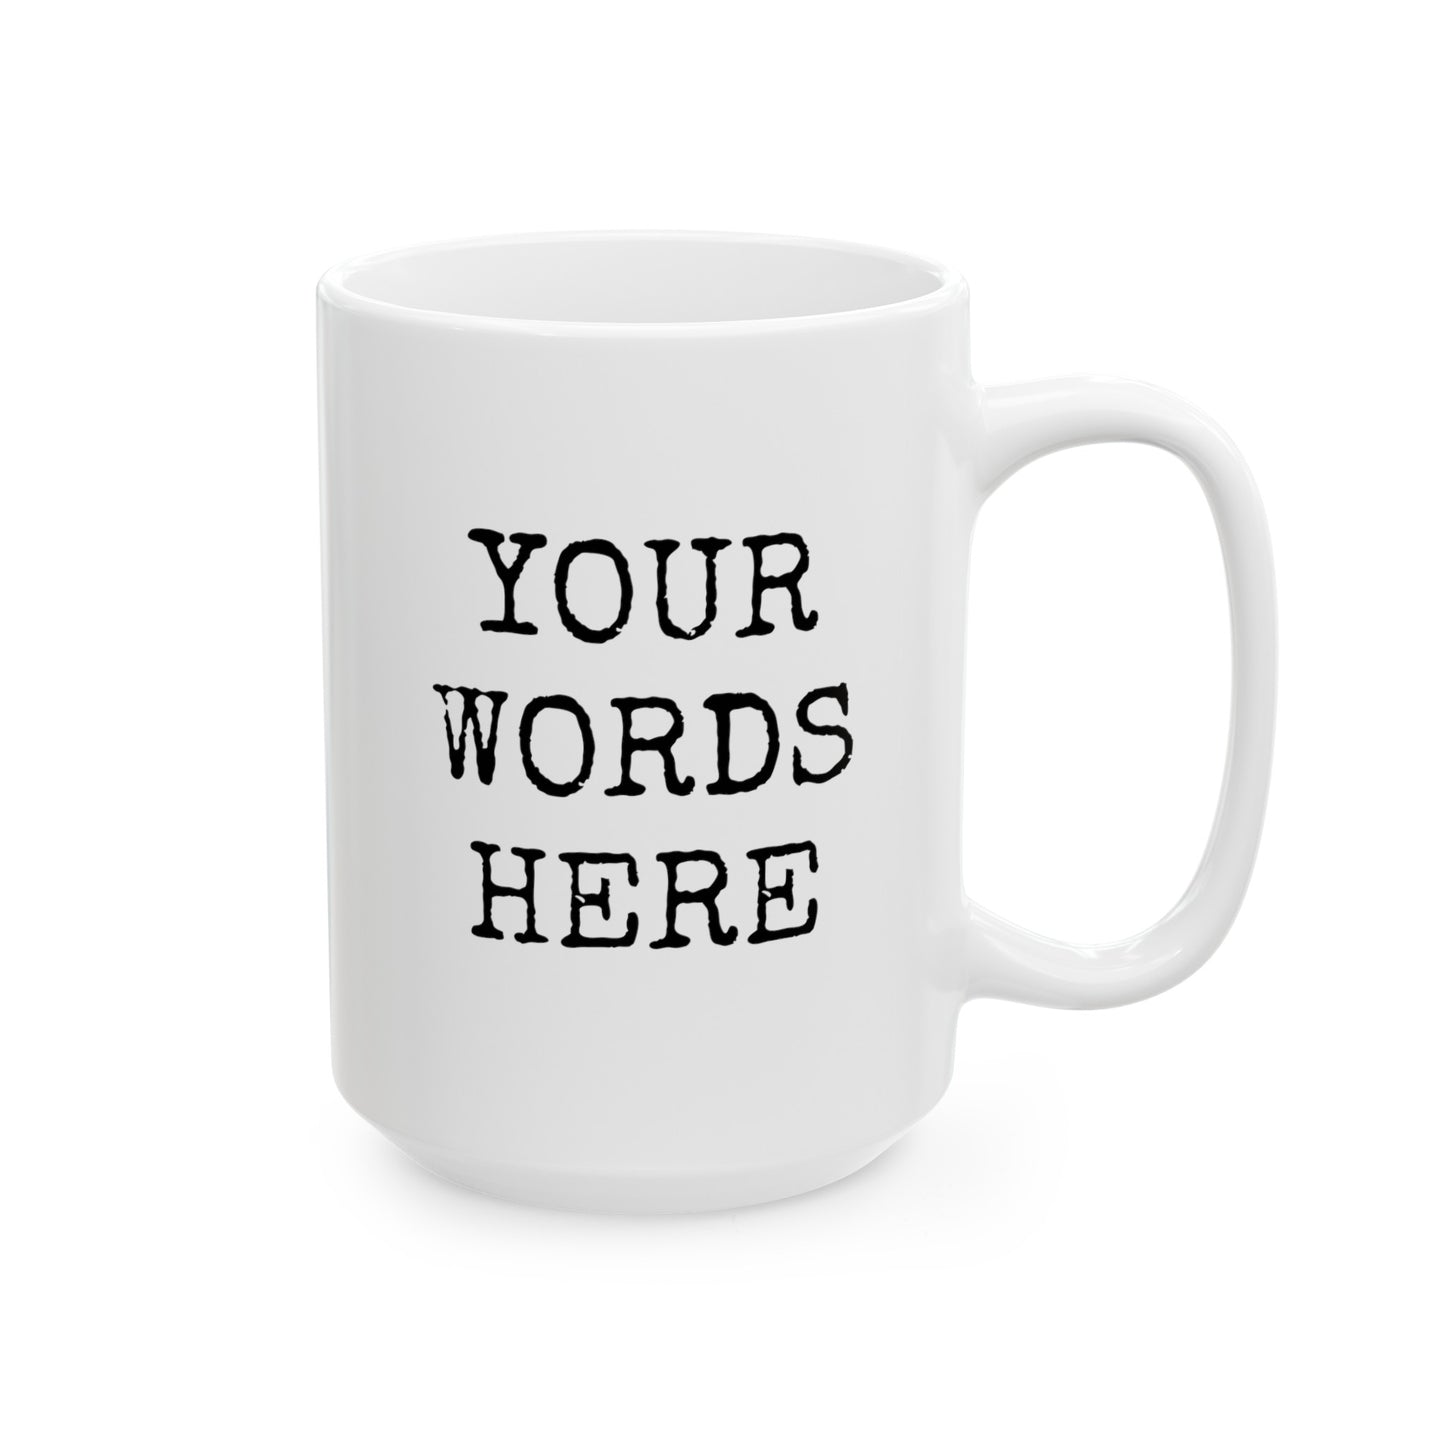 Create Your Own Words Here 15oz white funny large big coffee mug tea cup gift for friend family custom customized text personalized font waveywares wavey wares wavywares wavy wares